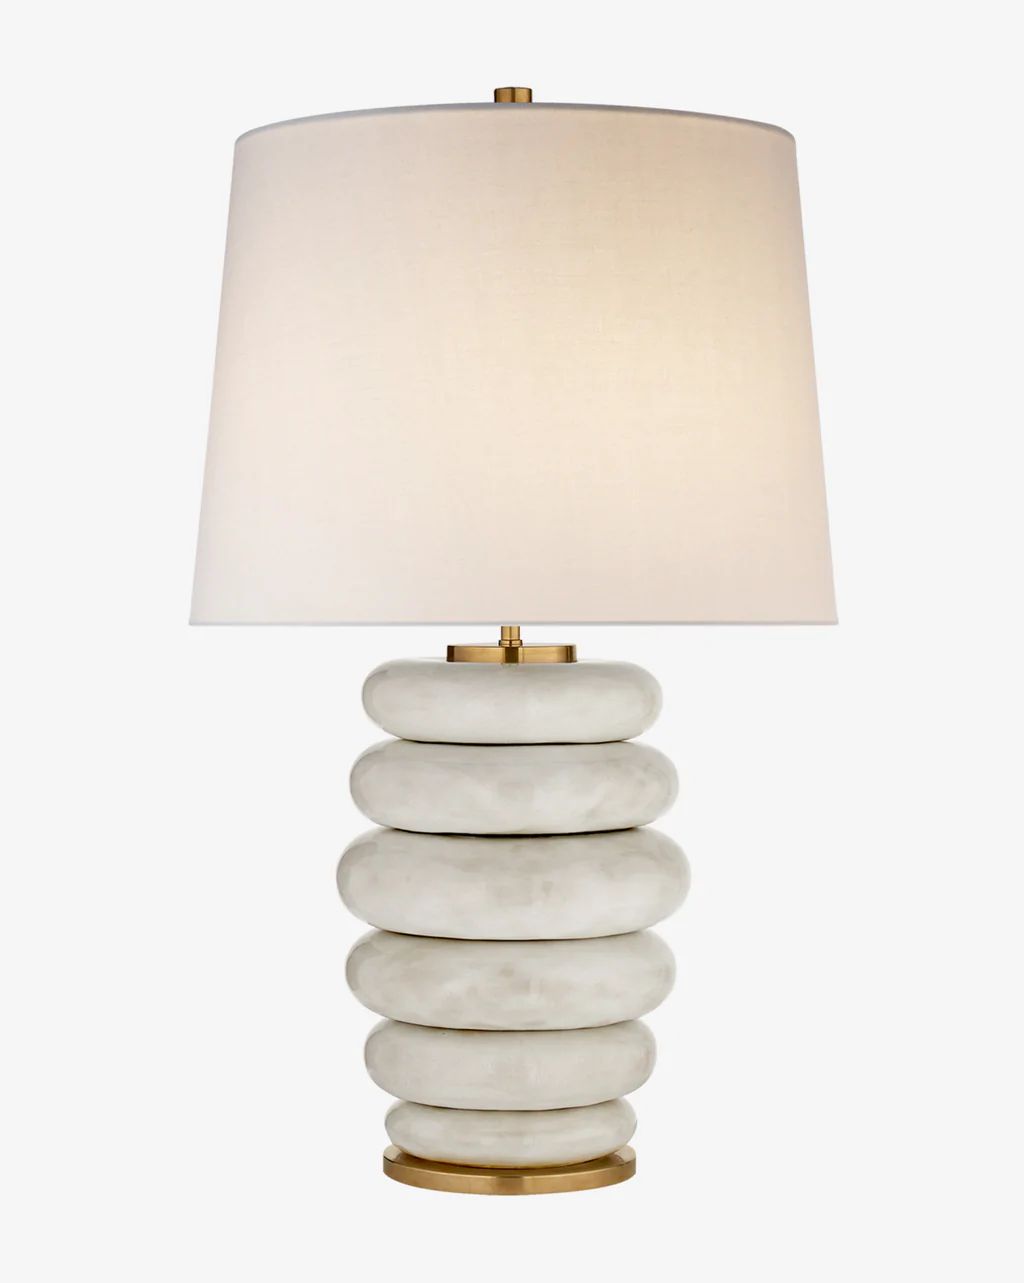 Phoebe Stacked Table Lamp | McGee & Co.